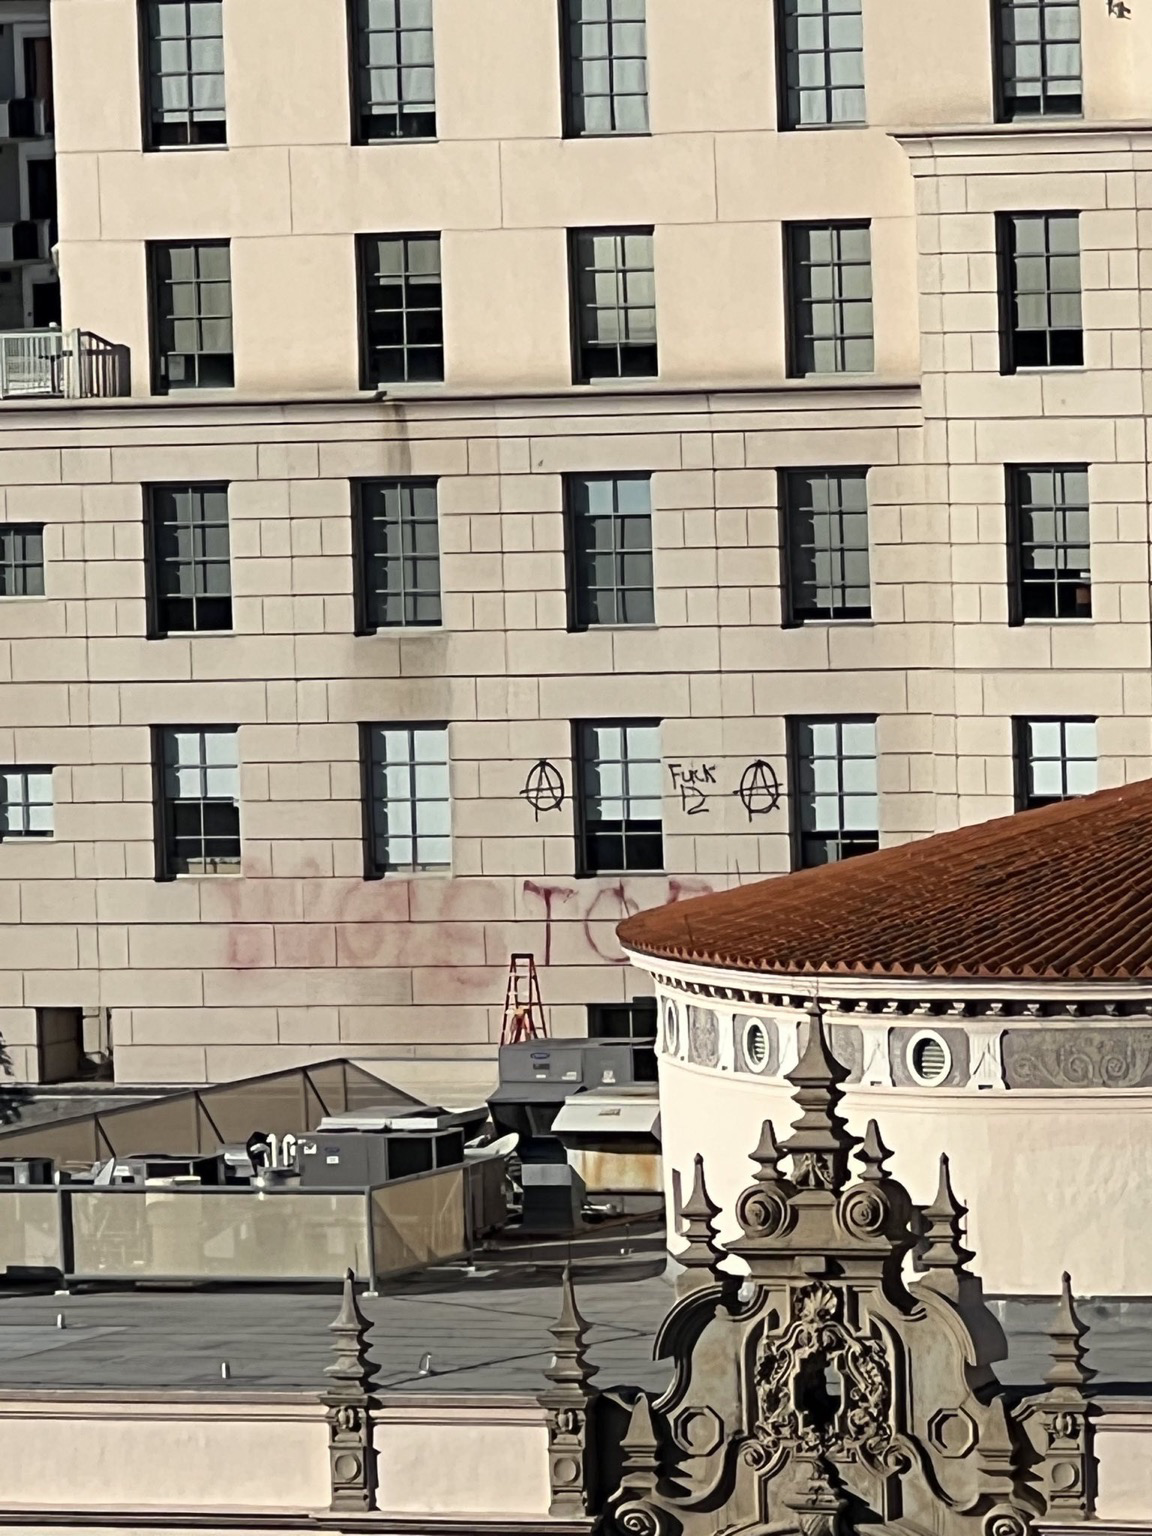 "B&G! STOP COP CITY" is sprayed on the side of a building with several windows in red spray paint. The words are accompanied by several anarchist circle-A symbols, and "fuck 12" is spray painted above it in black spray paint.